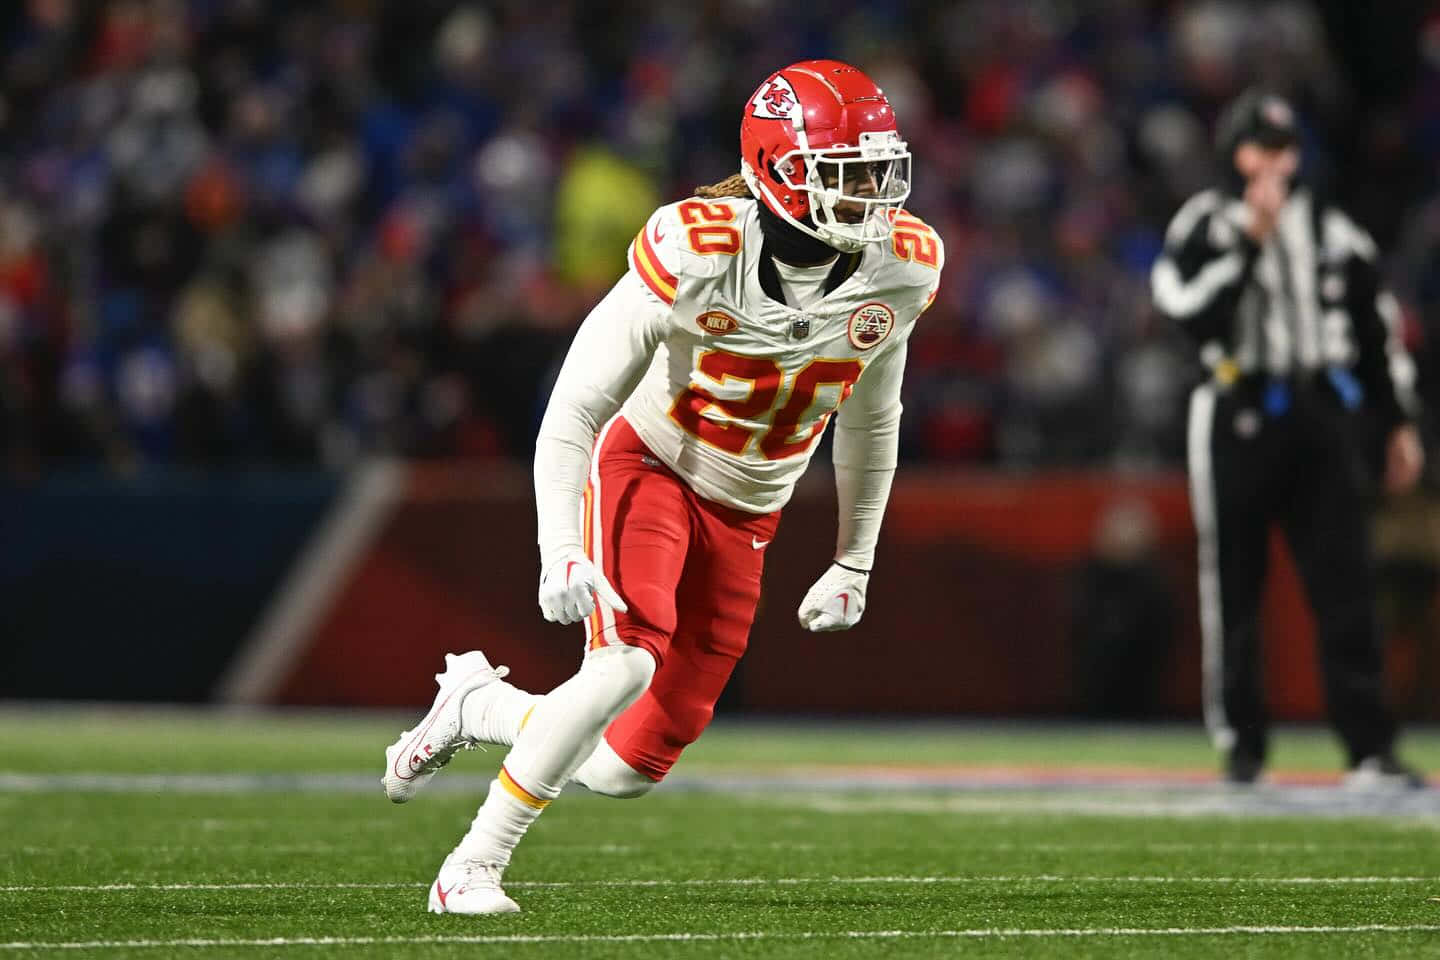 Kansas City Chiefs Player In Action Wallpaper